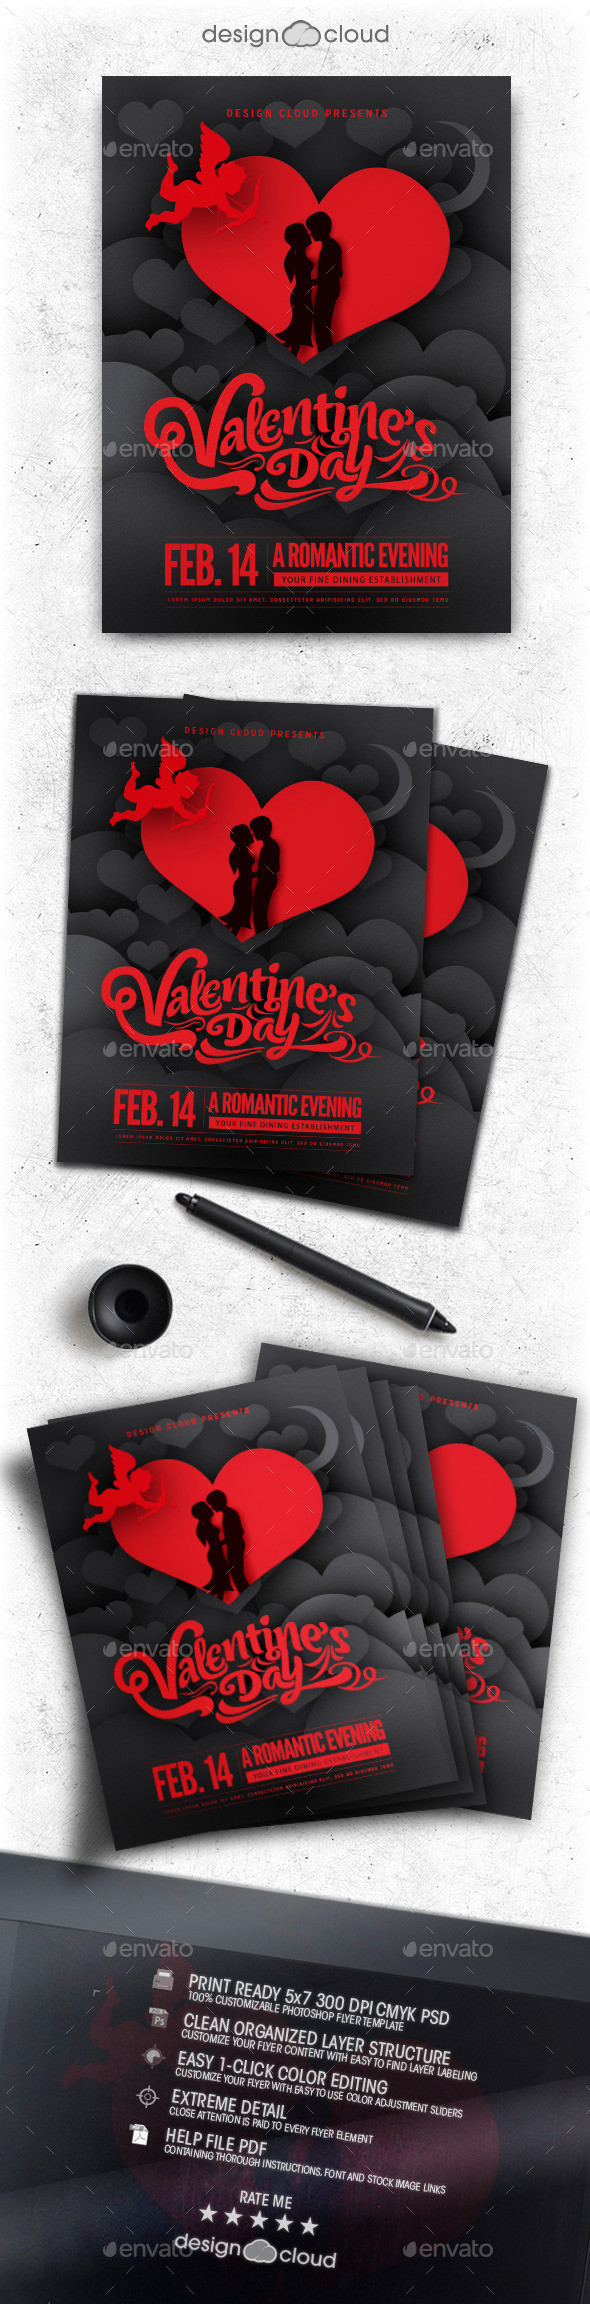 Preview elegant shaded valentine flyer template